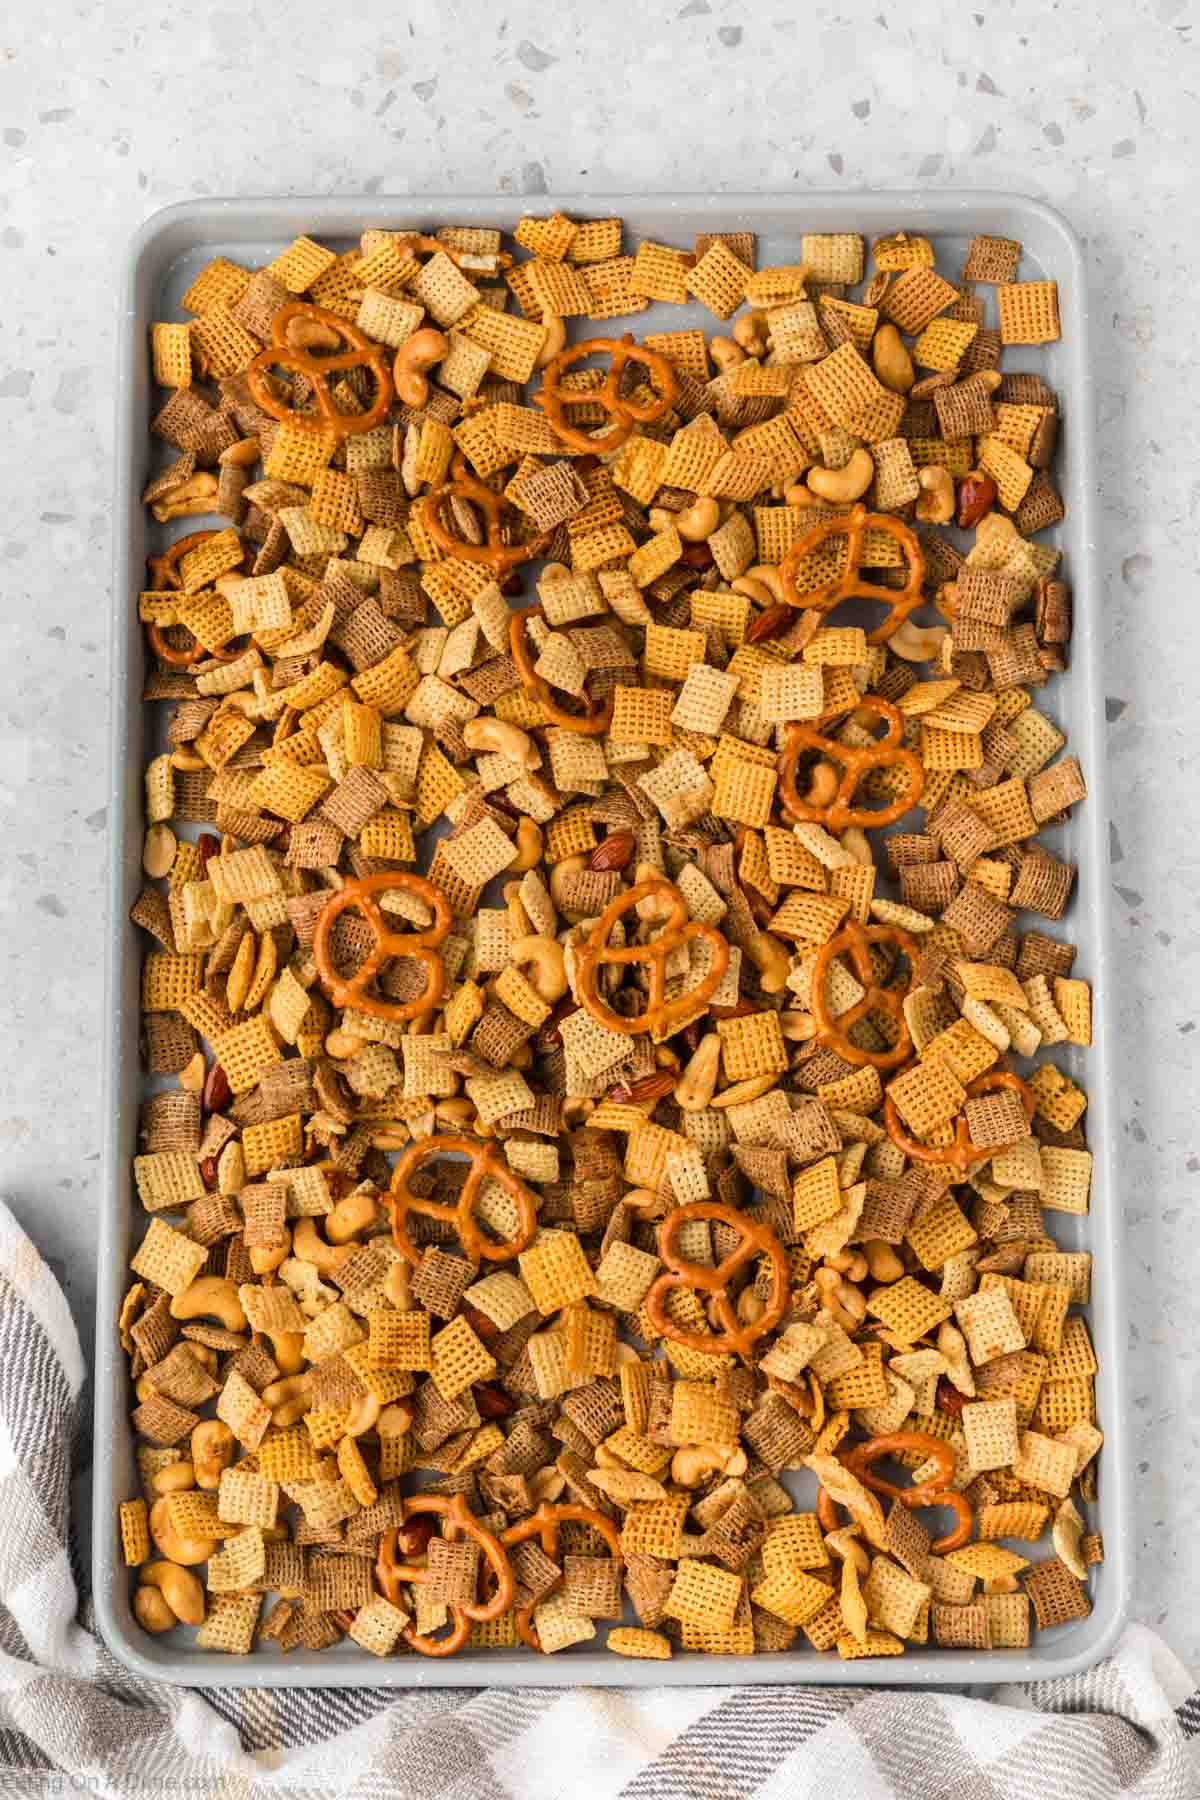 Original Chex Mix Recipe (Best Party Snack) - Insanely Good